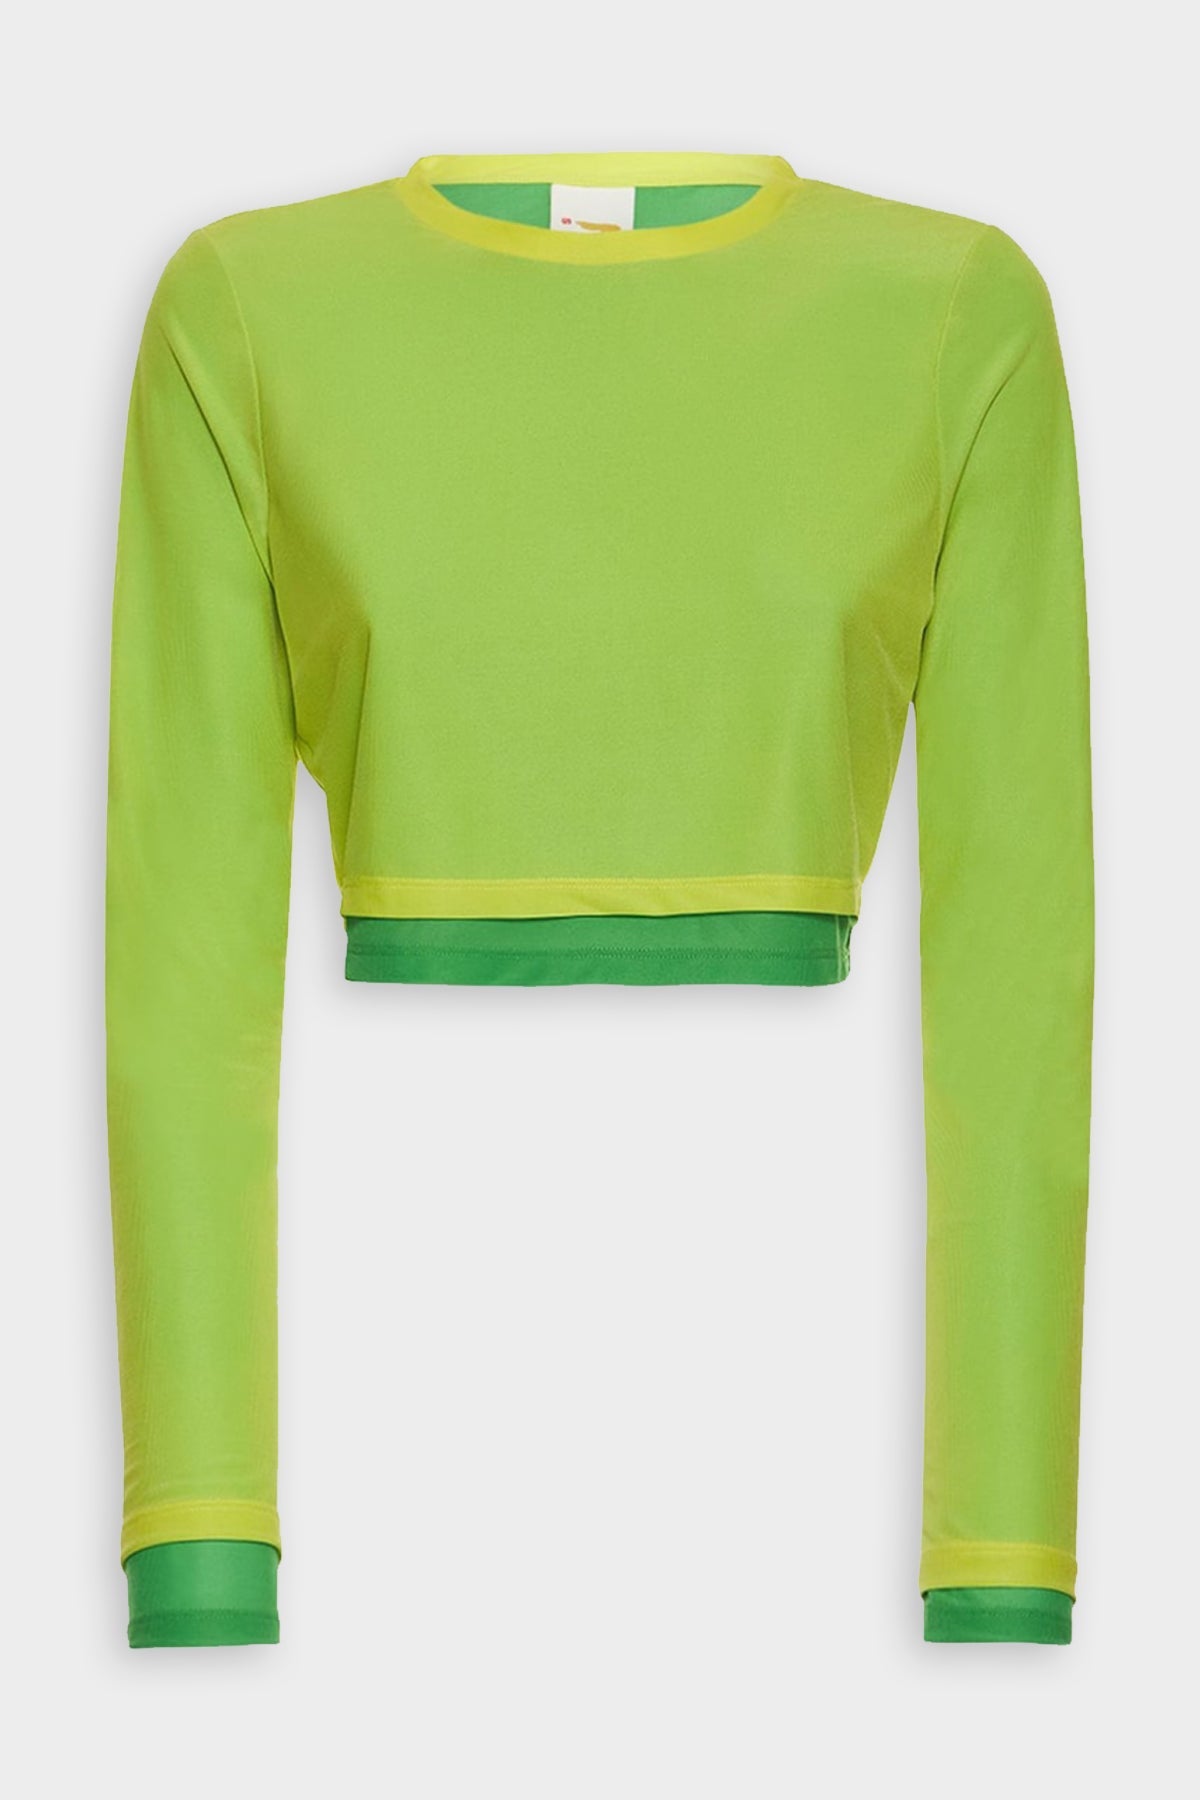 Mesh Mimsy Top in Lime - shop-olivia.com